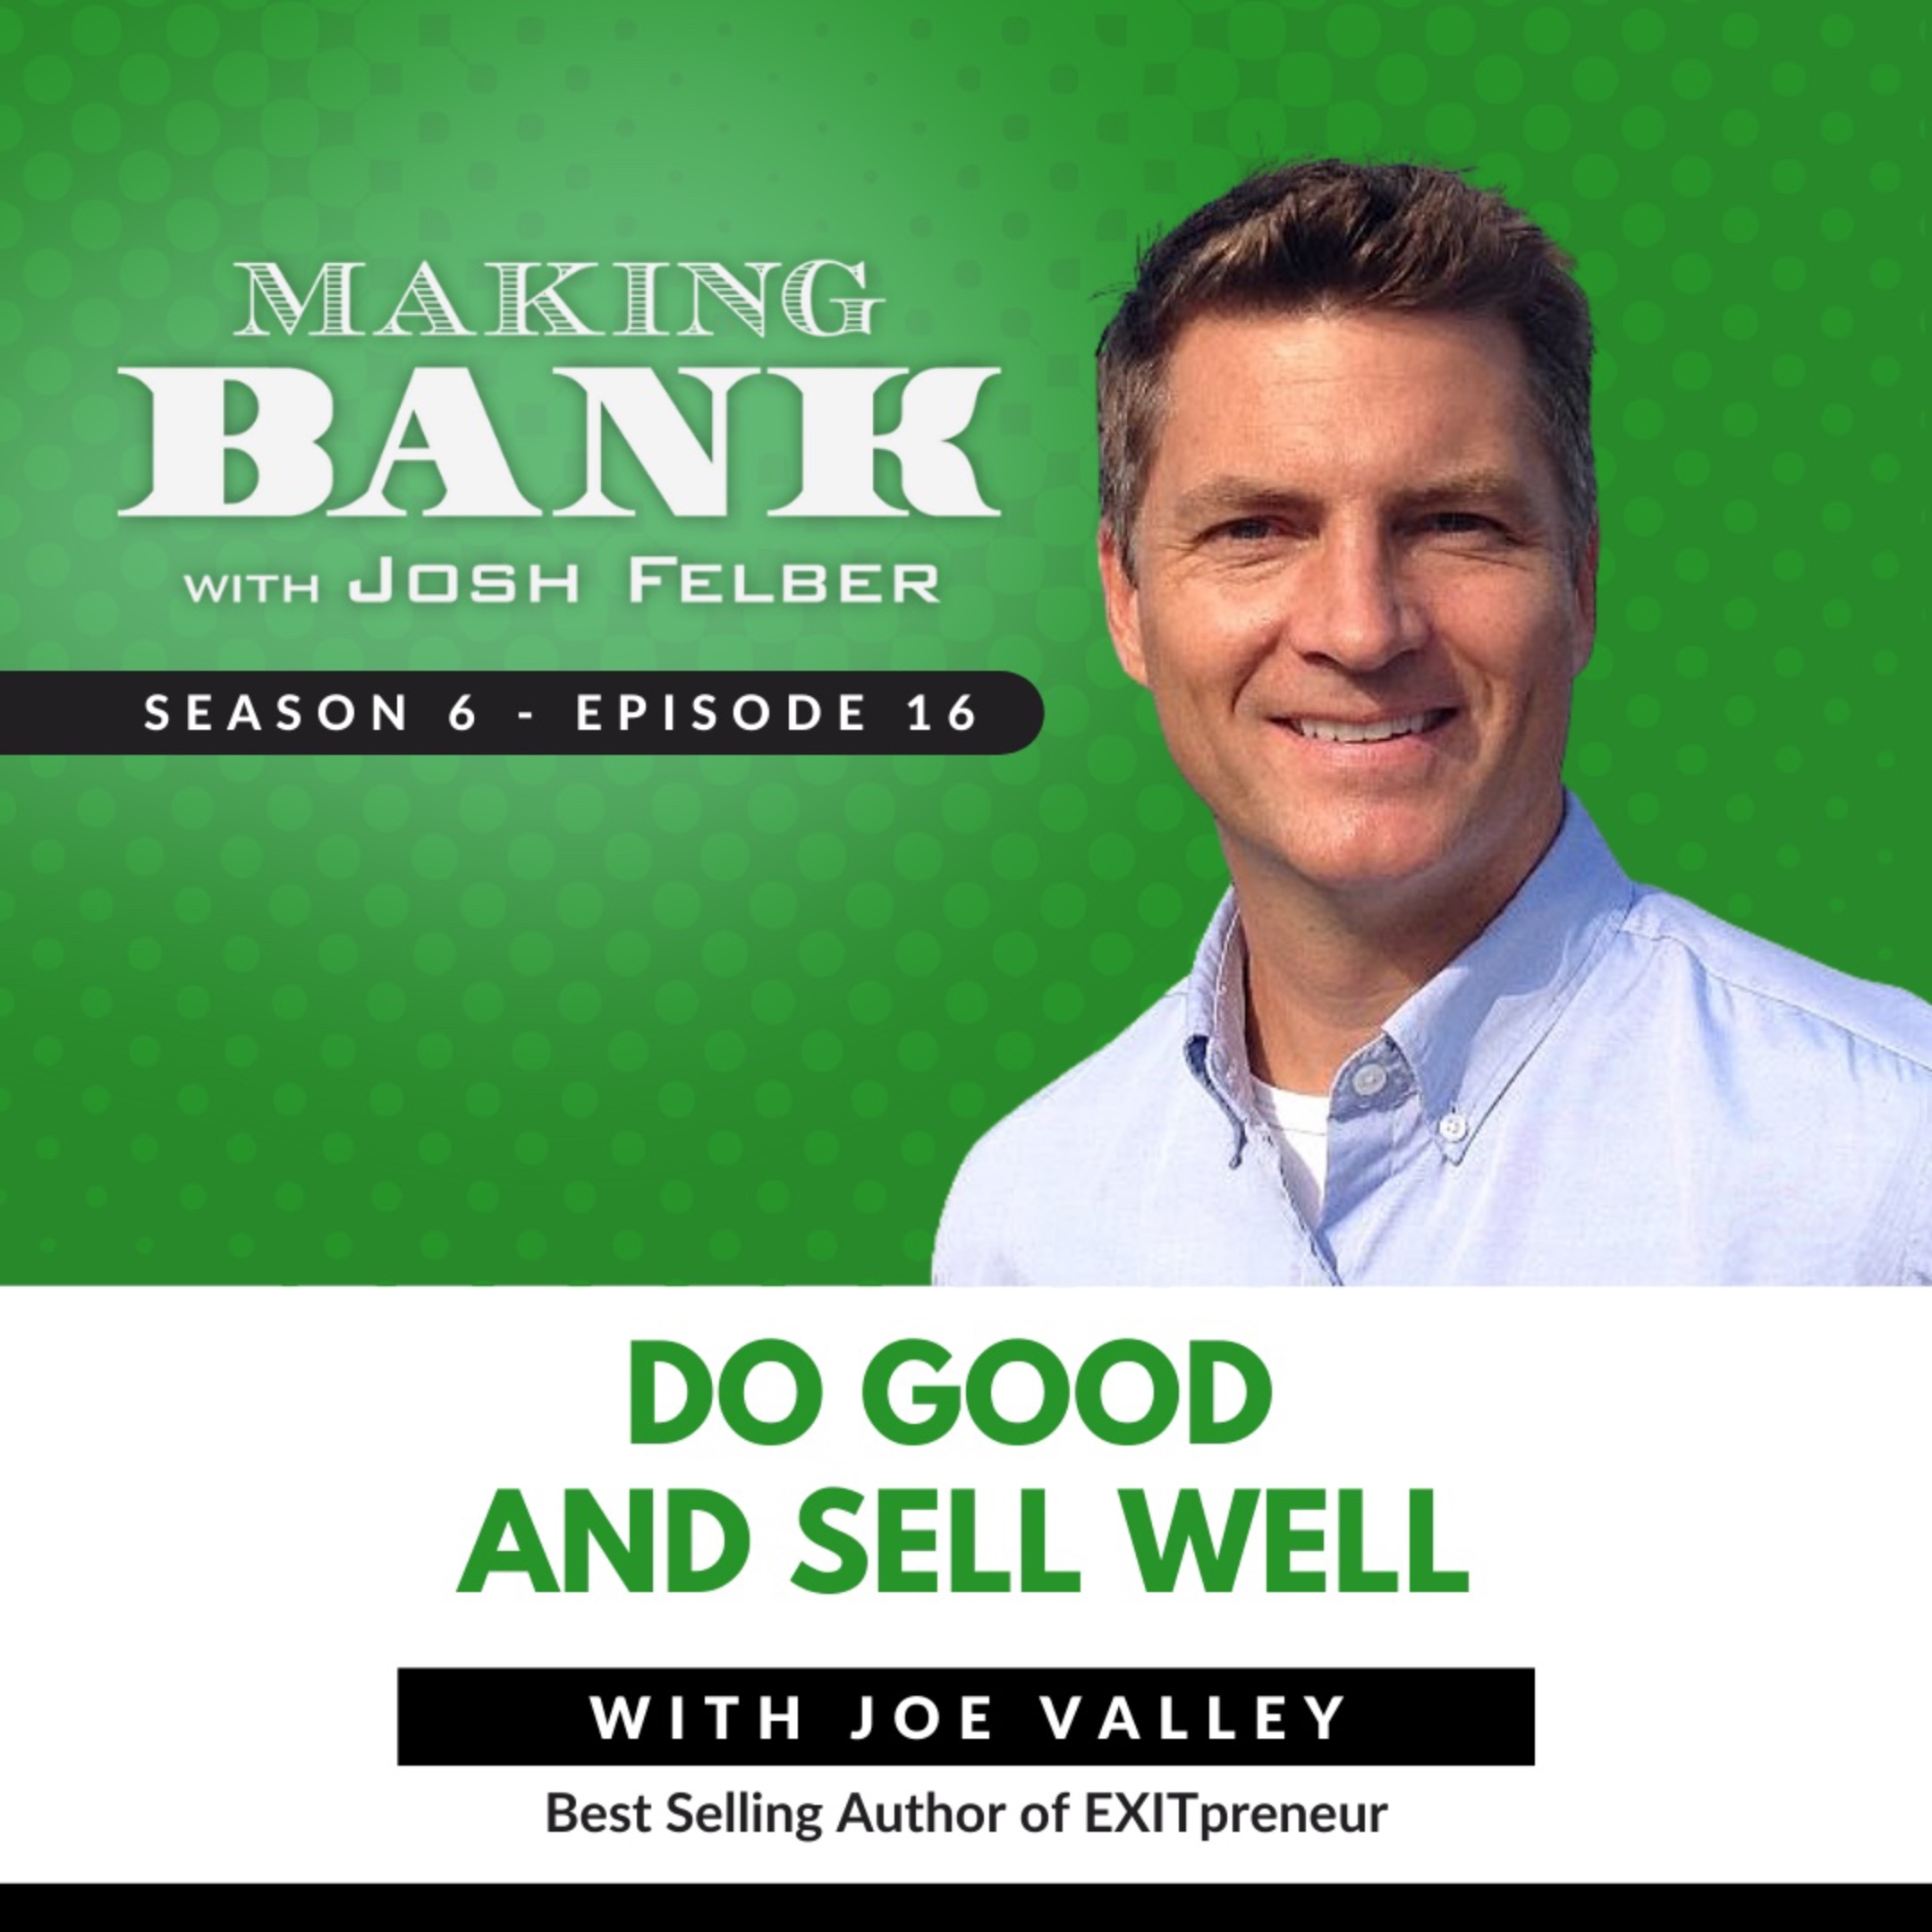 Do Good and Sell Well with Joe Valley #MakingBank S6E16